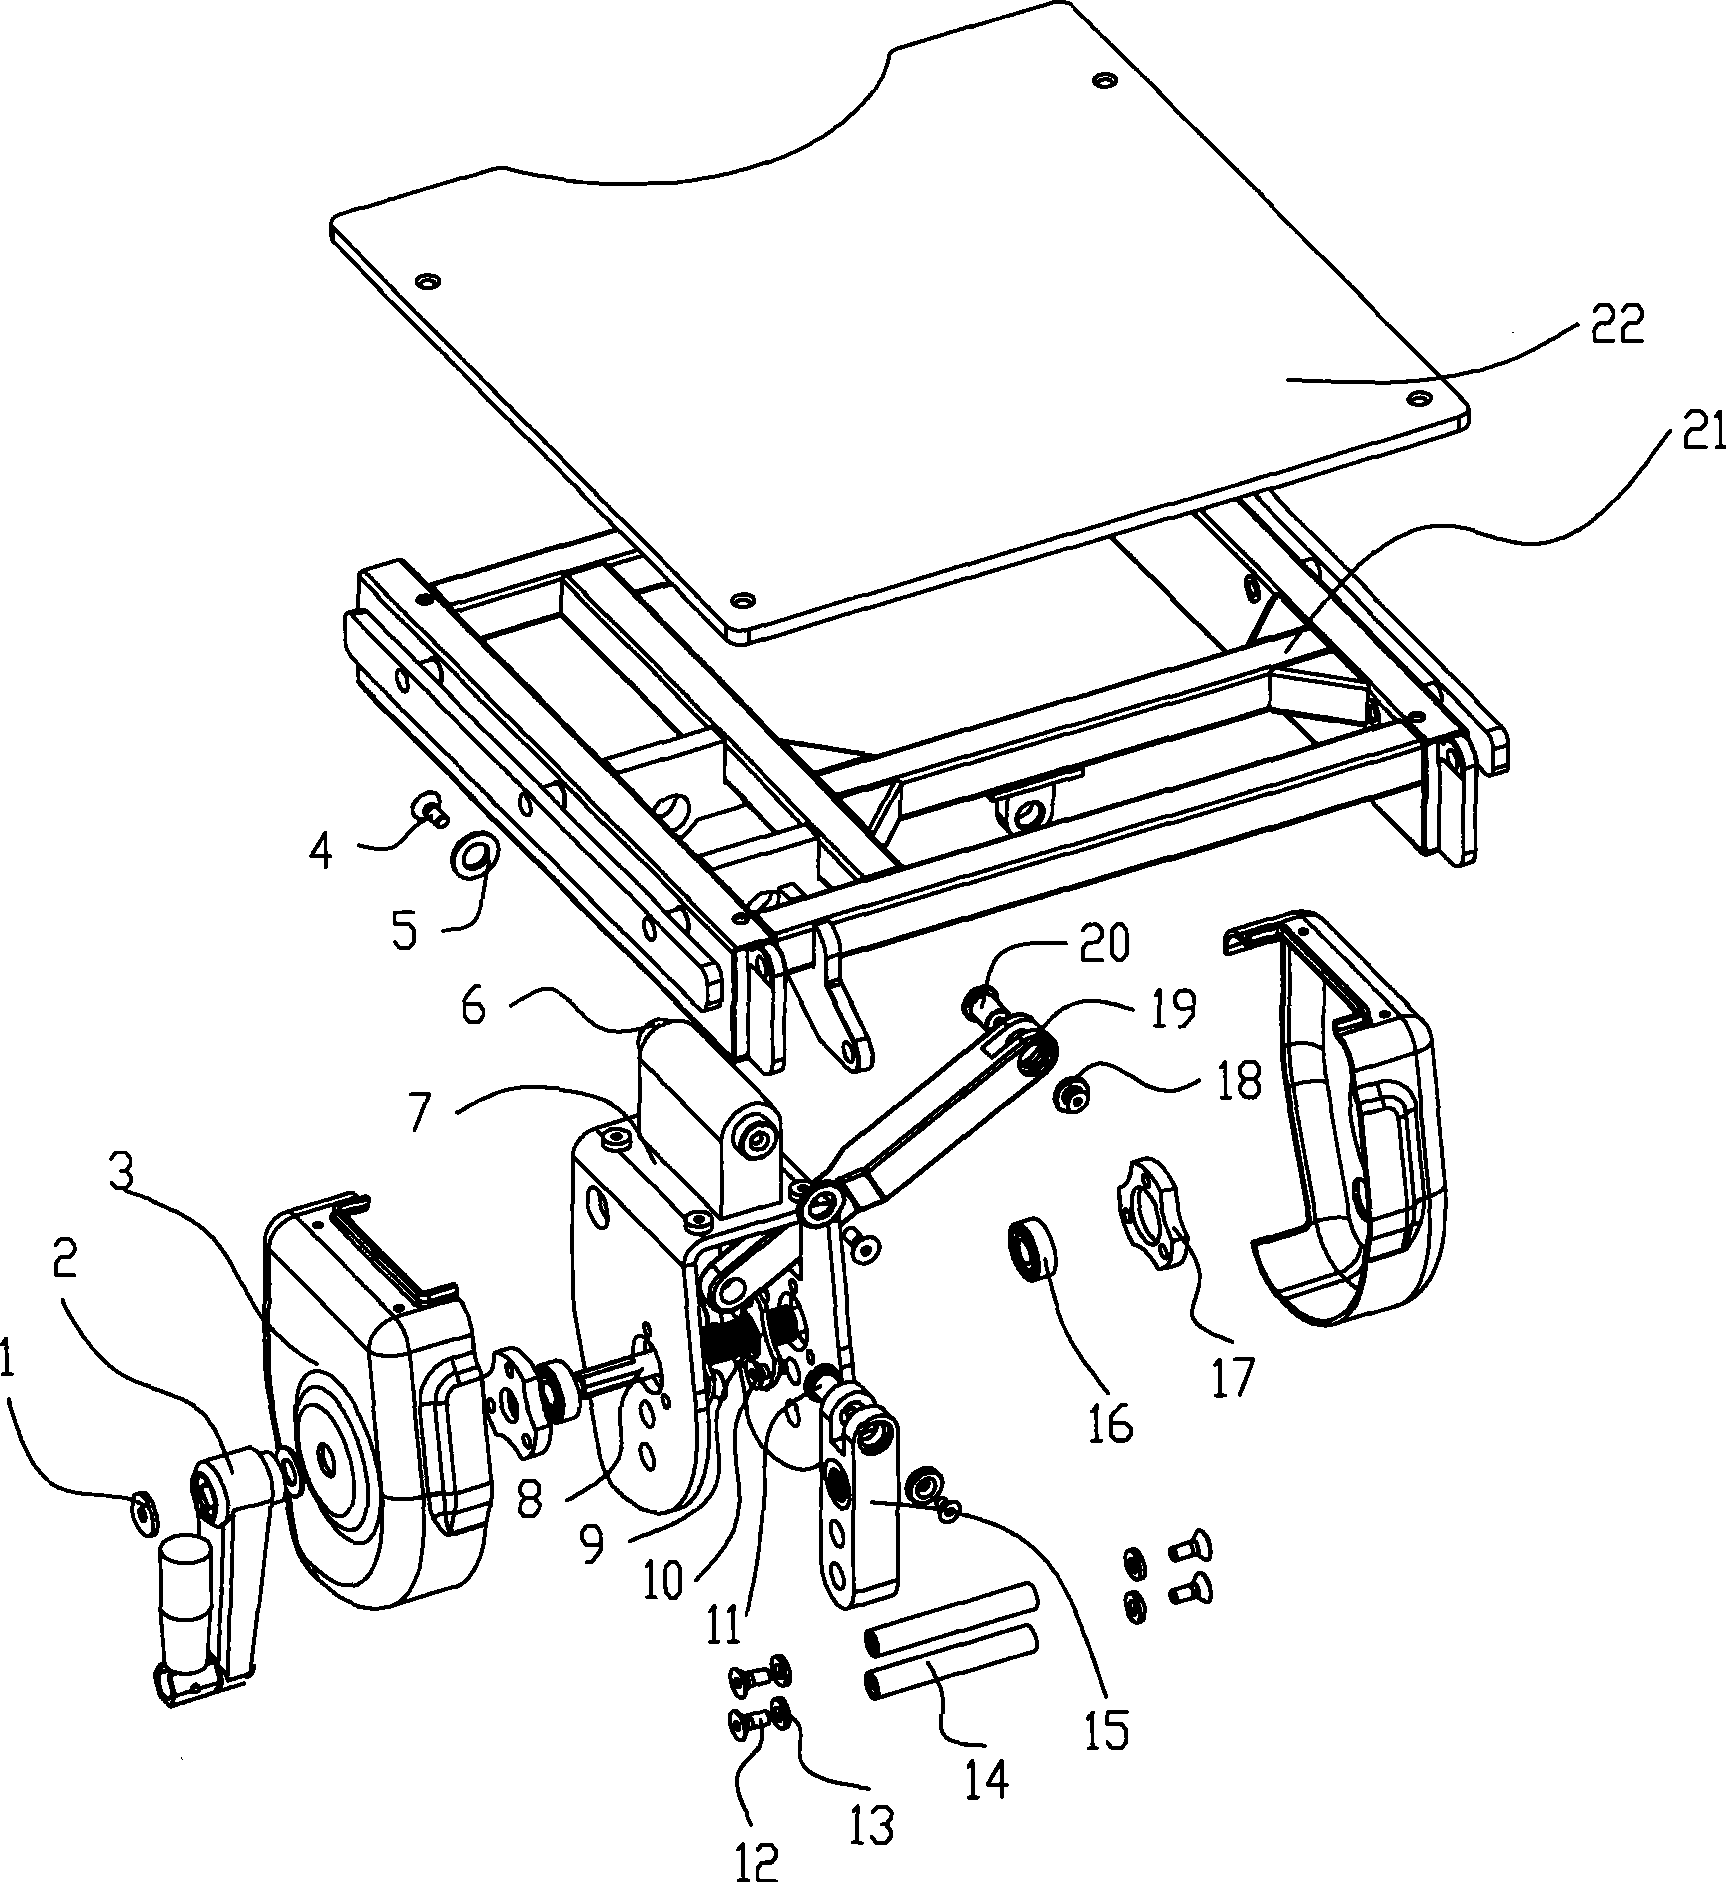 Mechanism for sloping table-board to right or left